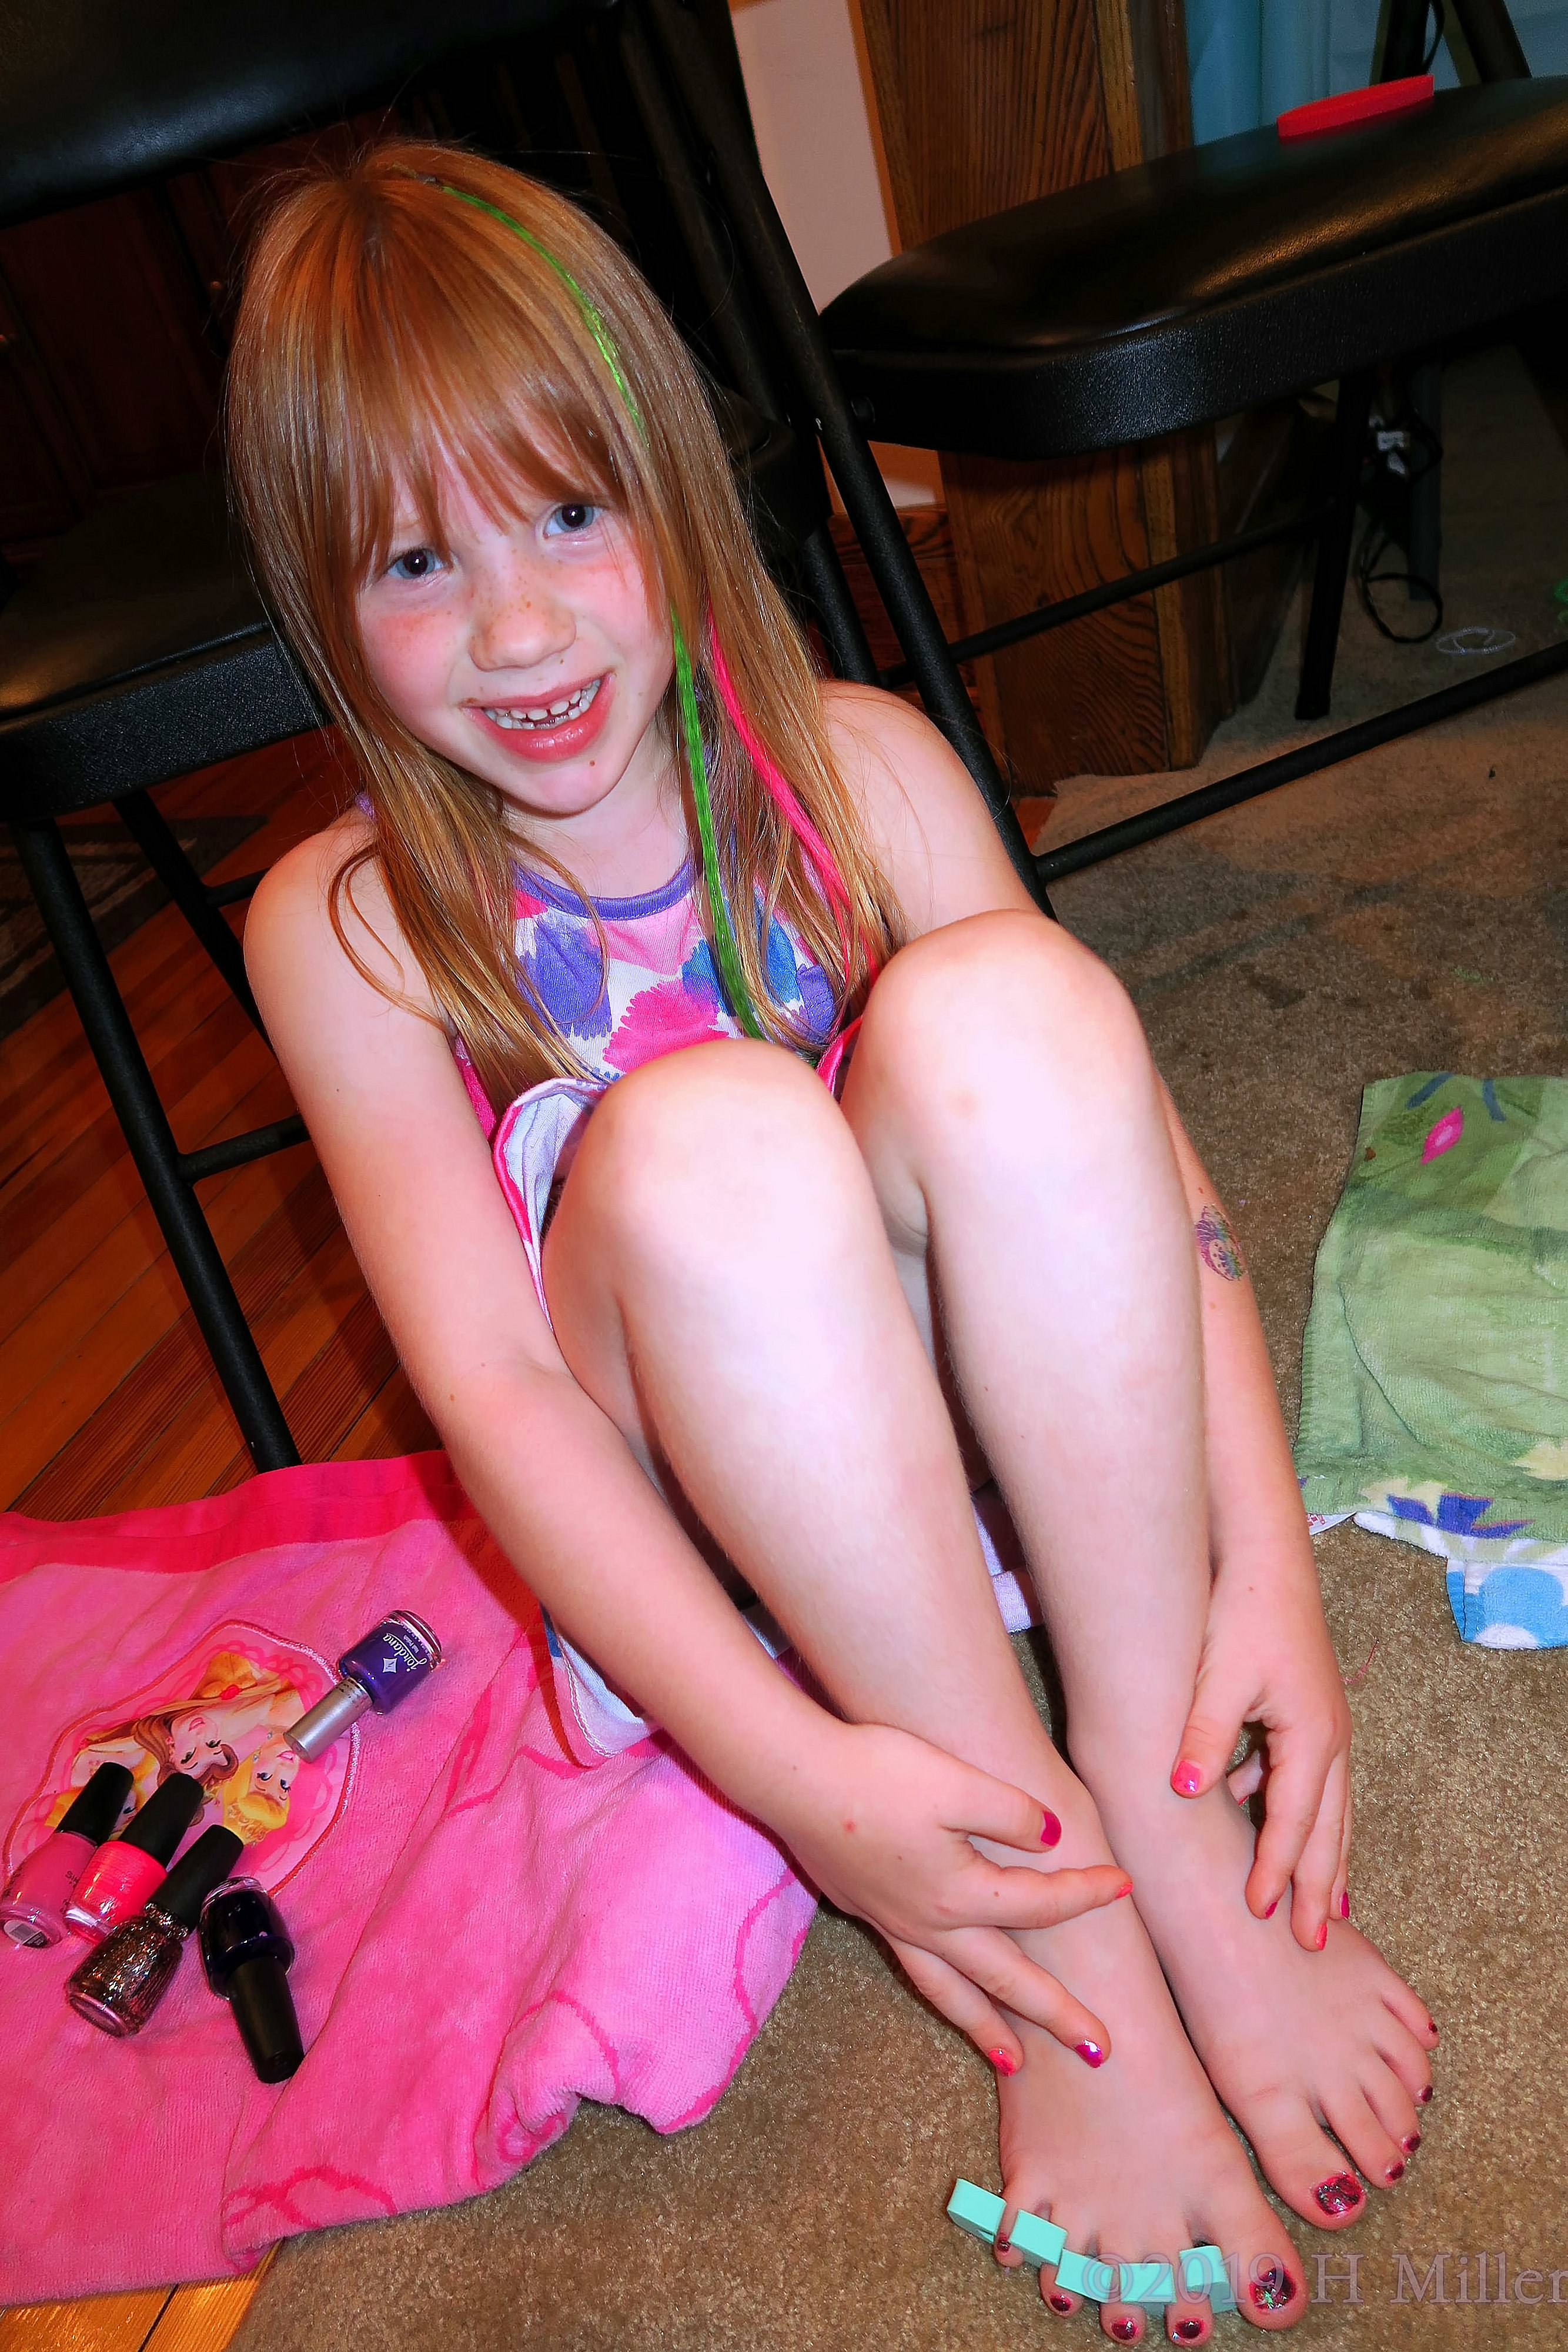 Posing With Pedis And Manis Take Two! Kids Manicure And Pedicure On Party Guest! 4